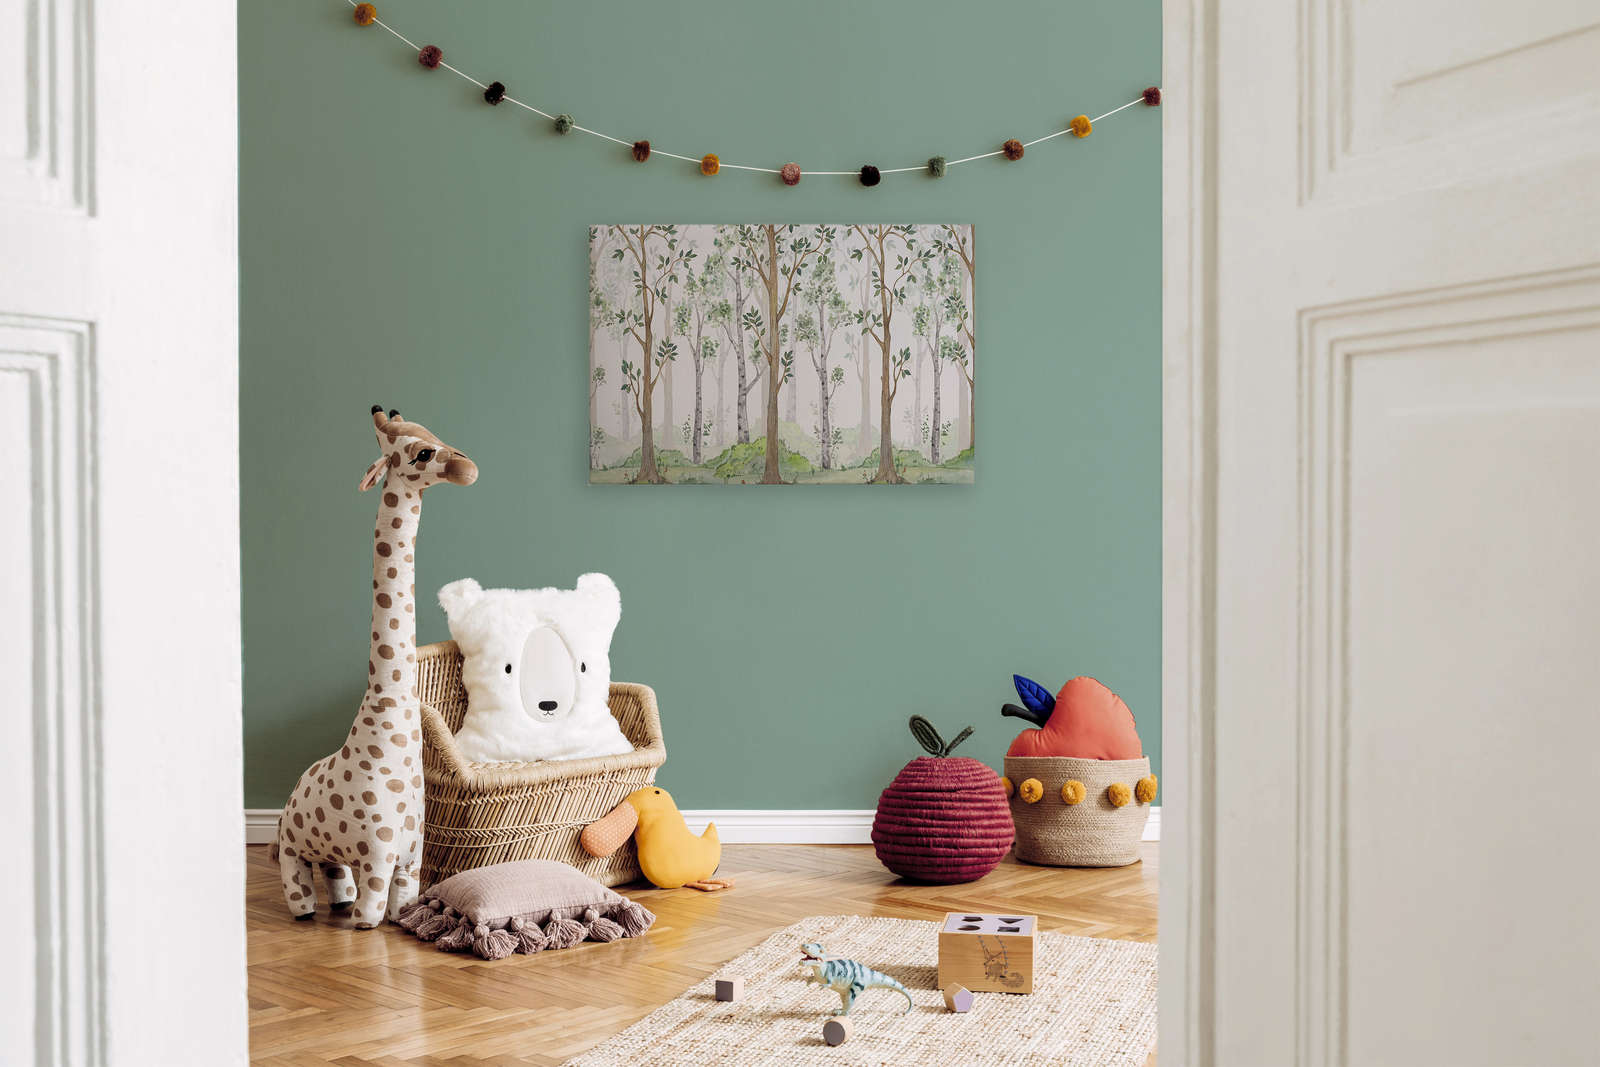             Canvas painting with painted forest for children's room - 0.90 m x 0.60 m
        